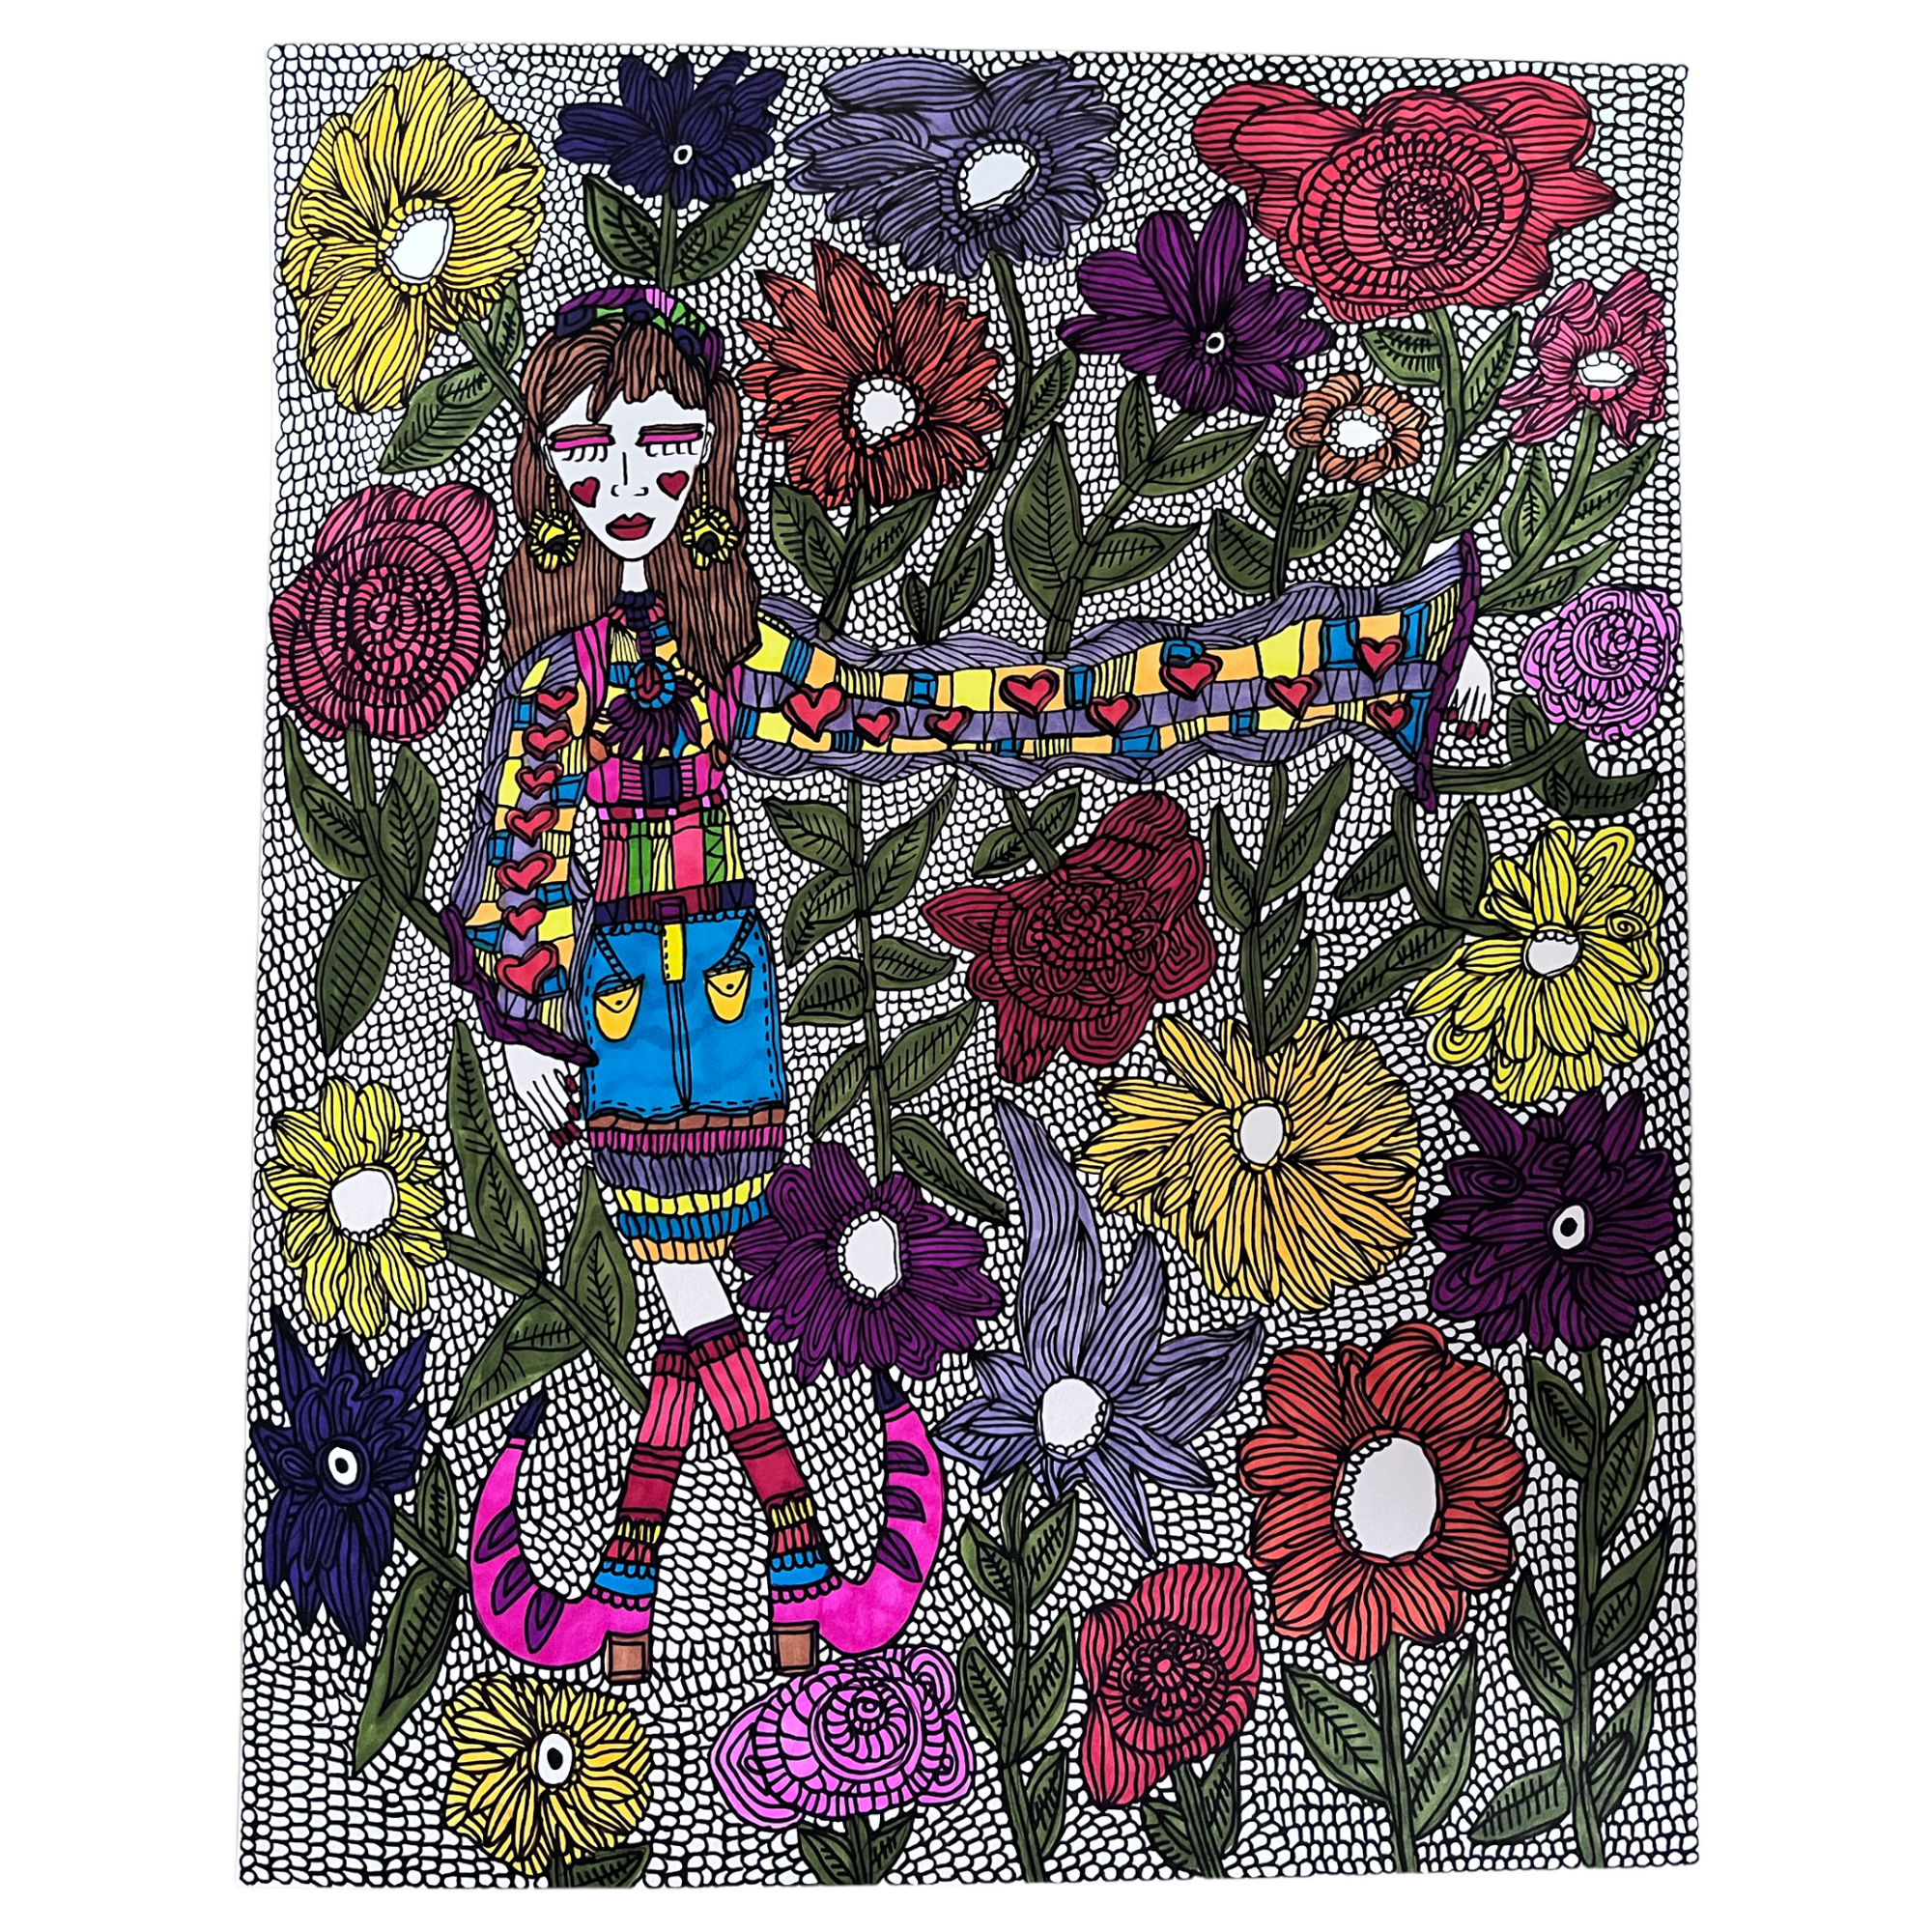 A drawing of a long armed woman amongst flowers by Antayjo Art